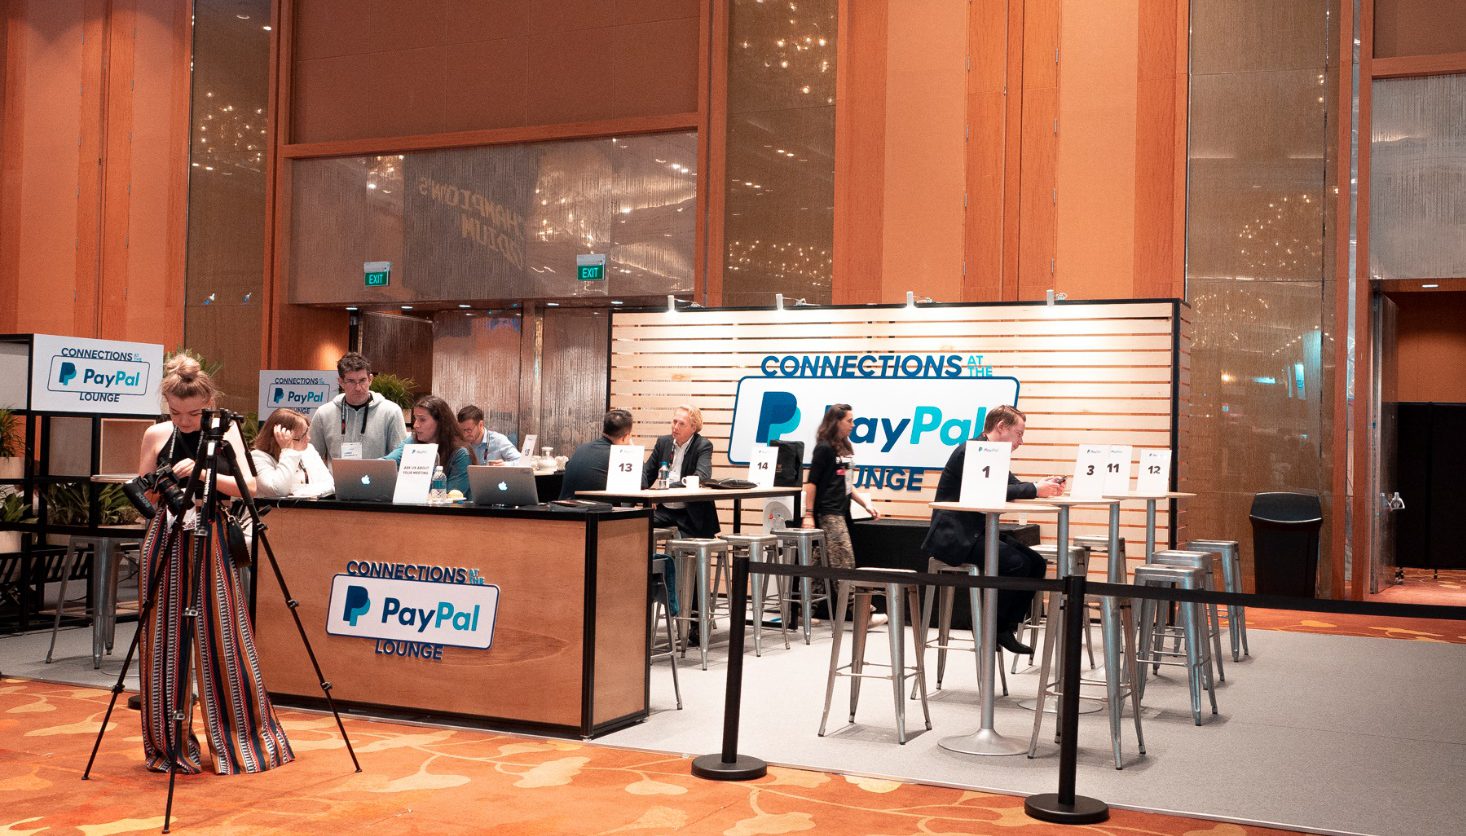 Paypal booth at a conference